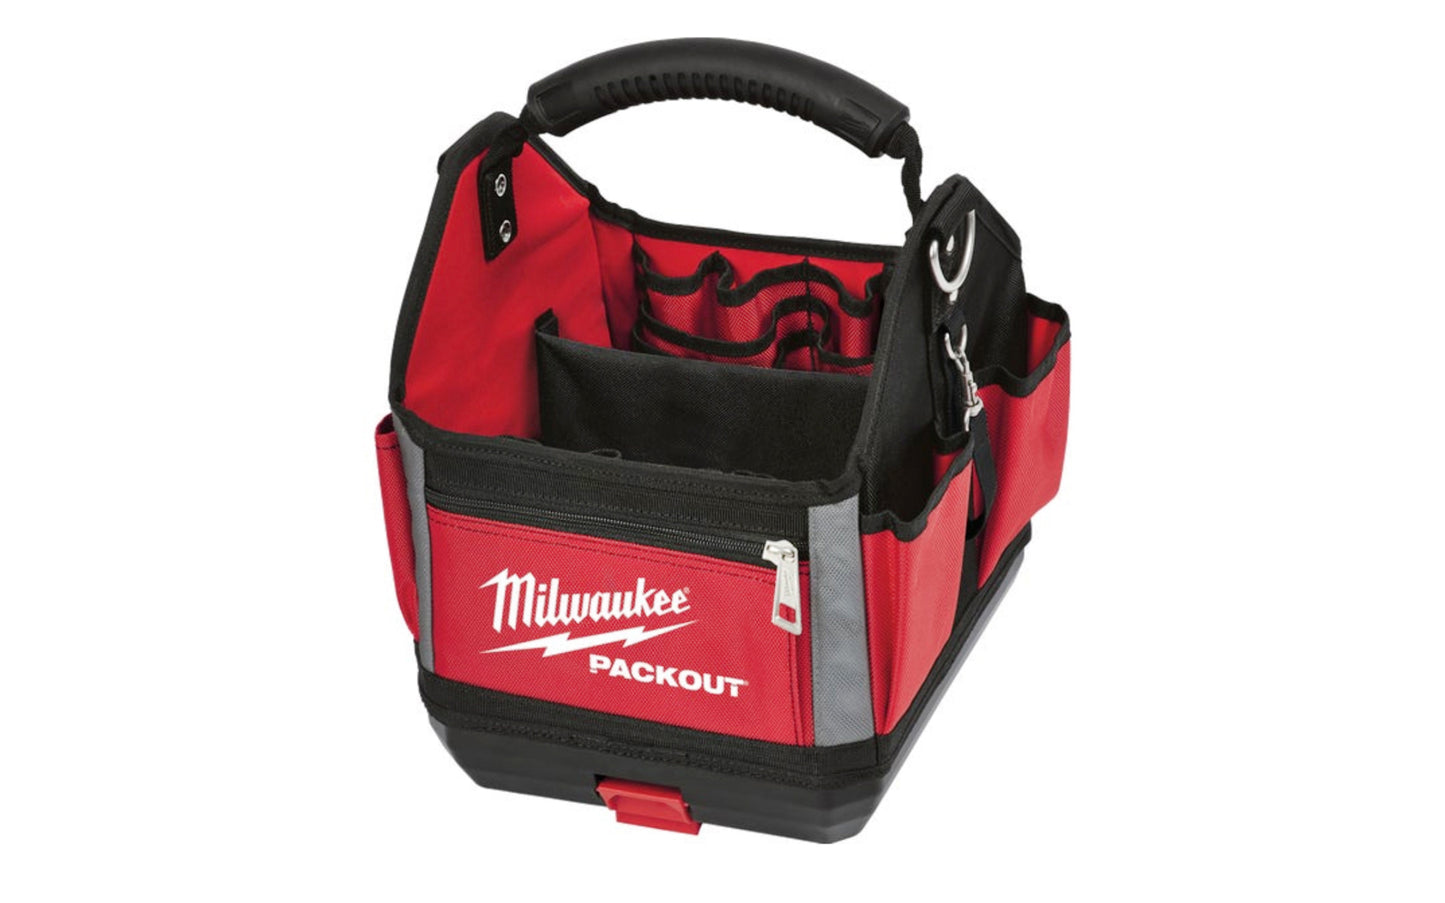 Milwaukee 28-Pocket 10" Tool Tote "Packout". Part of the PACKOUT Modular Storage System. Features an impact resistant molded base that fully integrates with all PACKOUT system components. Constructed with 1680D ballistic material, all metal hardware, and heavy-duty zippers, the tool bag is designed for ultimate durability. The over-molded handle allows for easy transport, and pockets are designed to organize and carry tools and accessories. Model 48-22-8310.